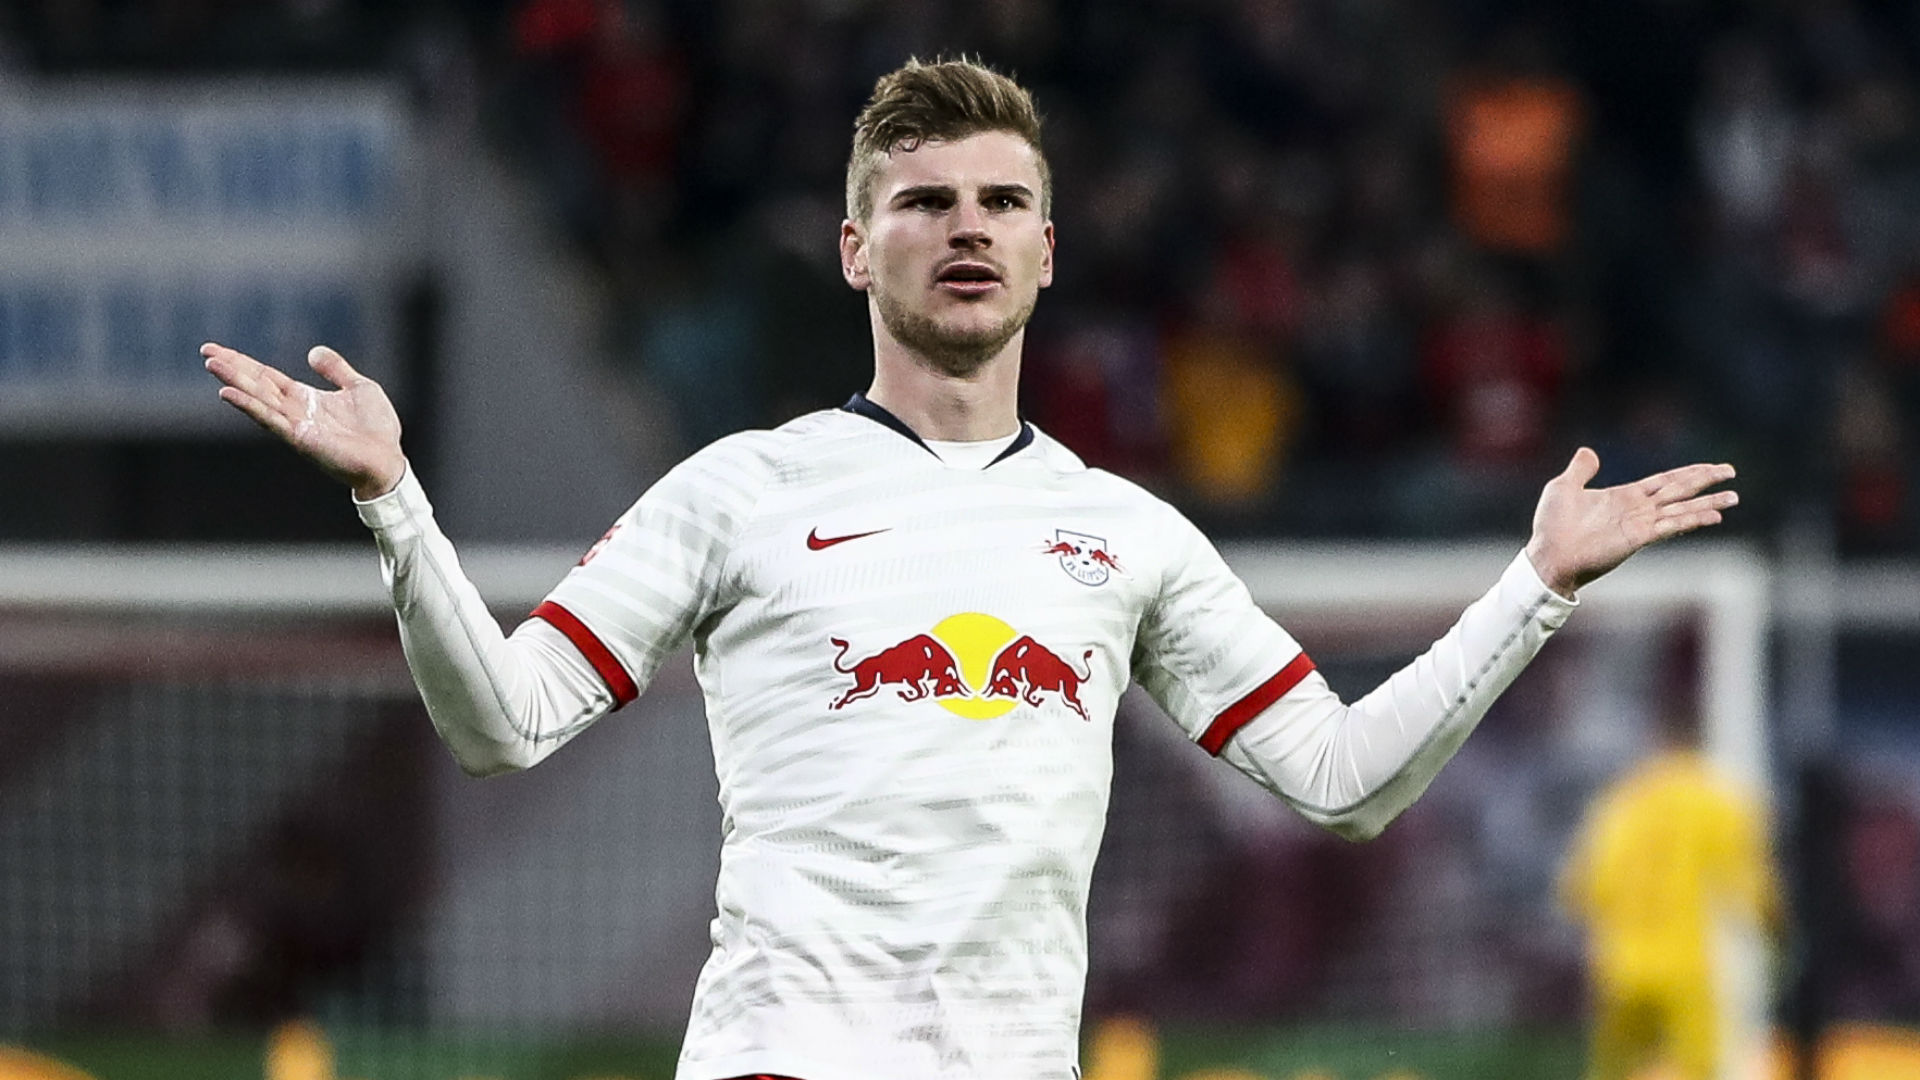 RB Leipzig star Timo Werner could reportedly fill Lautaro Martinez's boots at Inter.